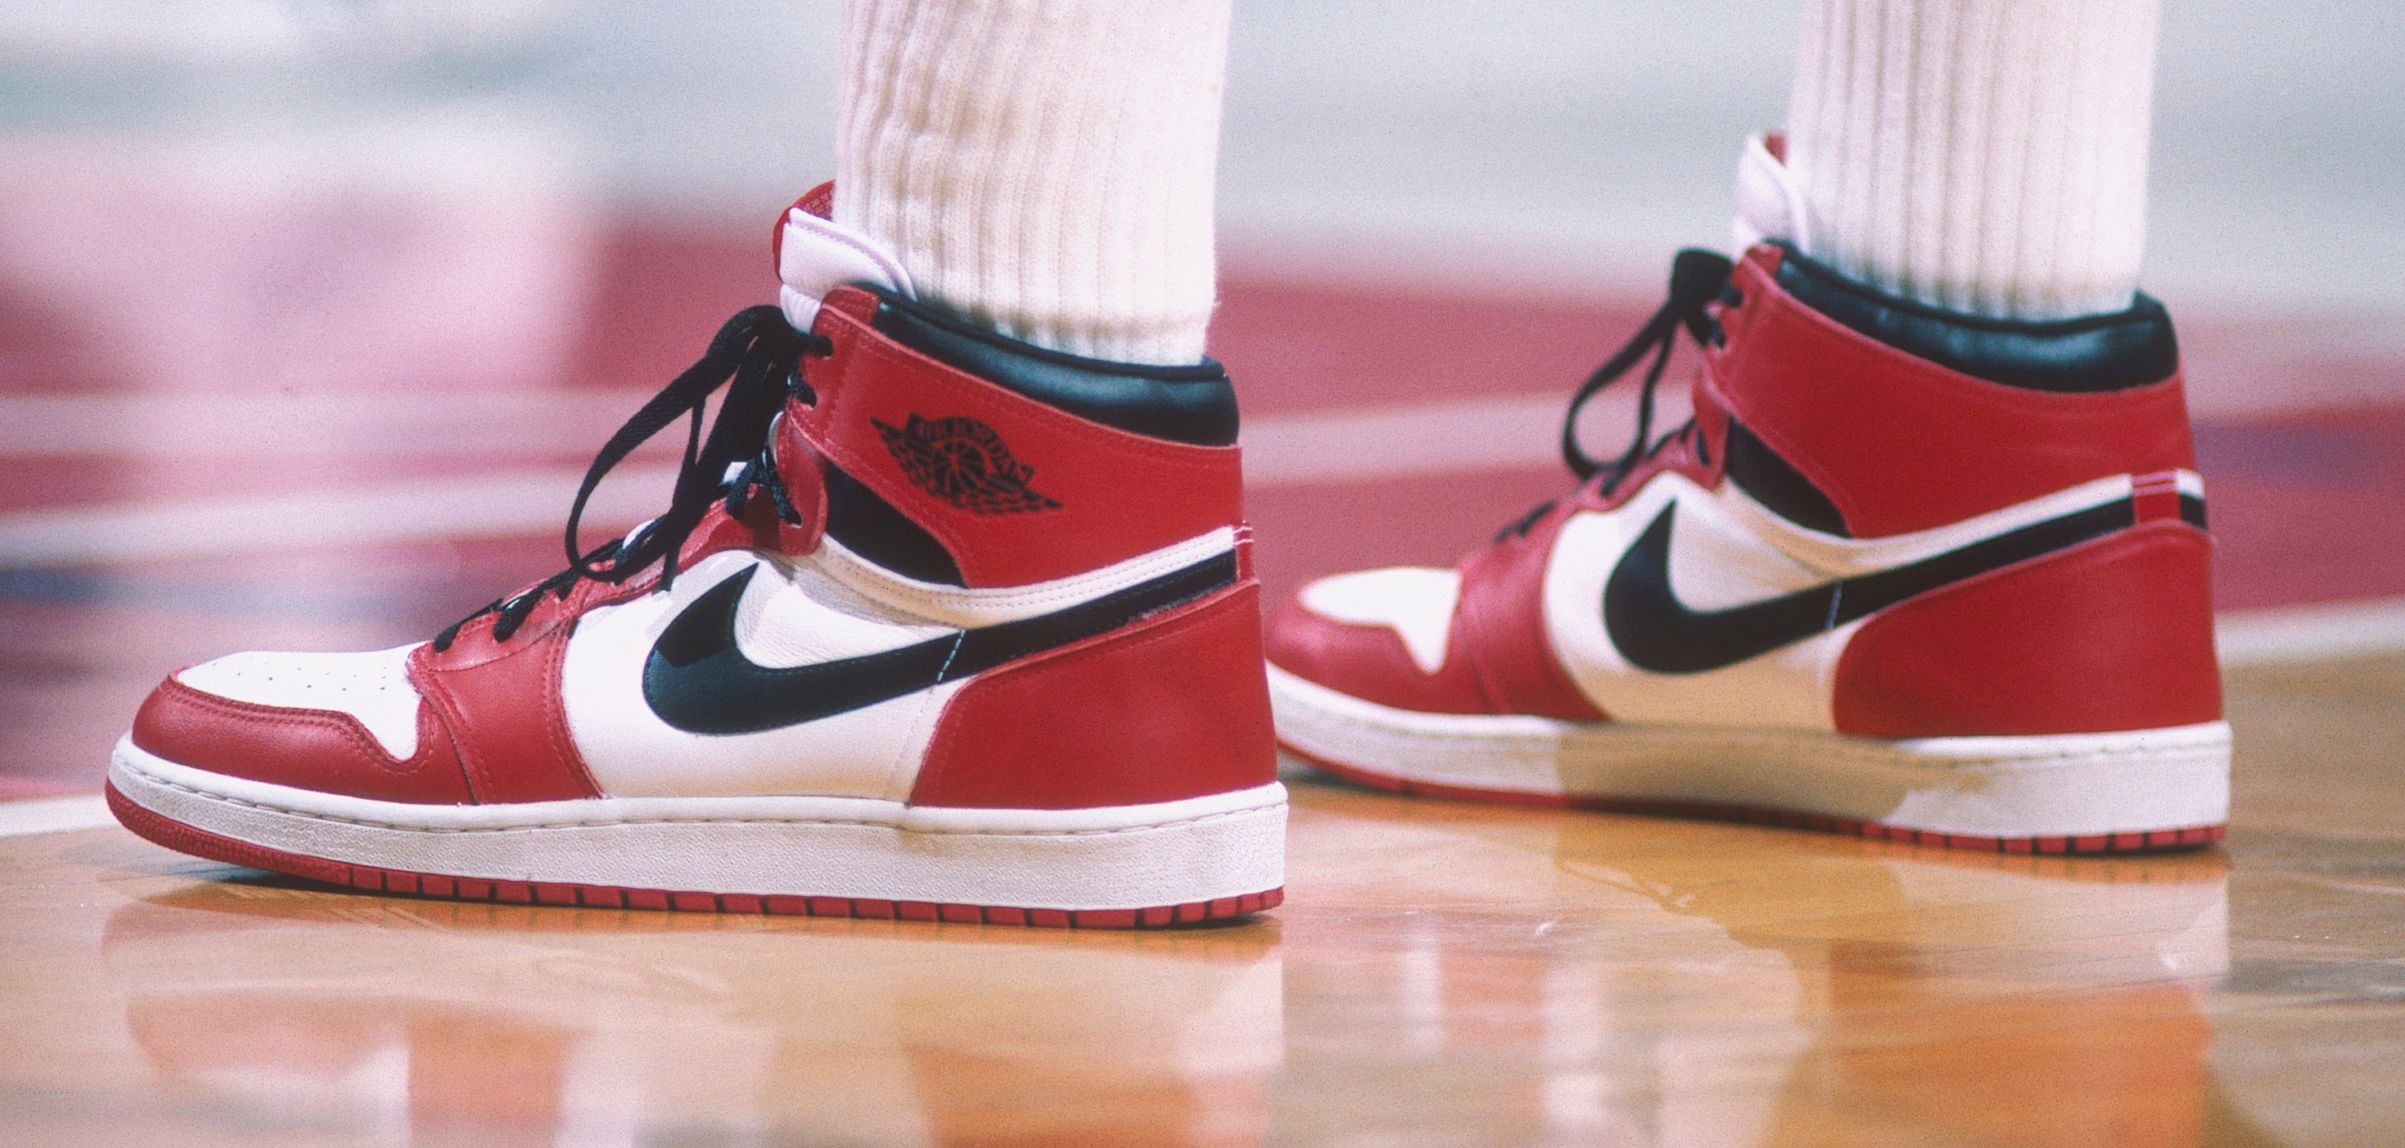 How of the Most Iconic Sneakers in History Almost Didn't Happen